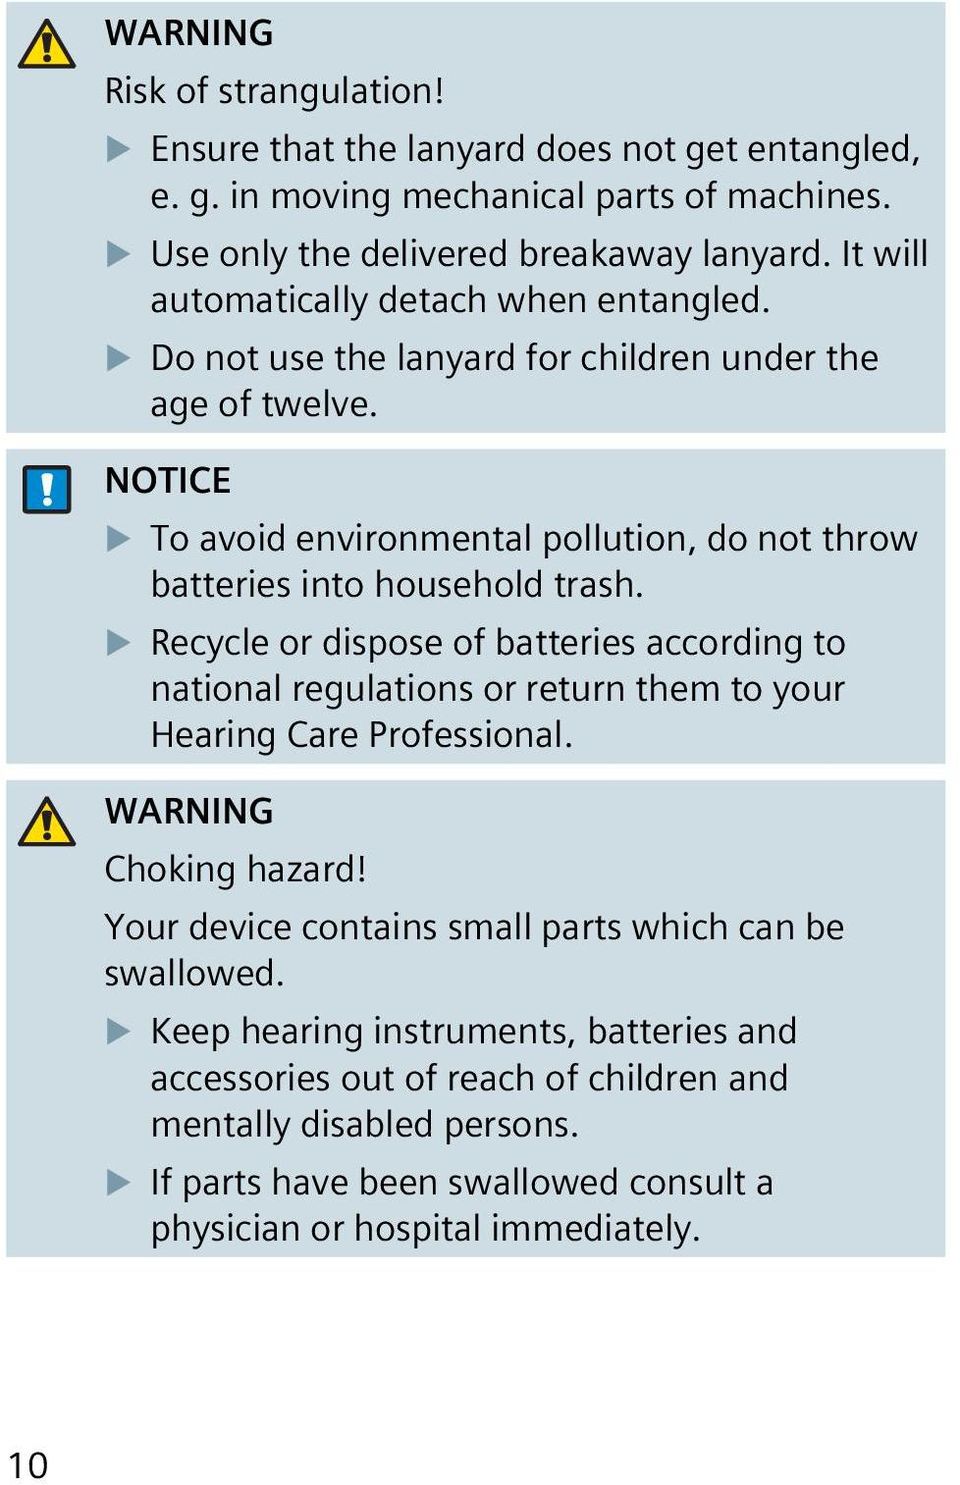 NOTICE To avoid environmental pollution, do not throw batteries into household trash.